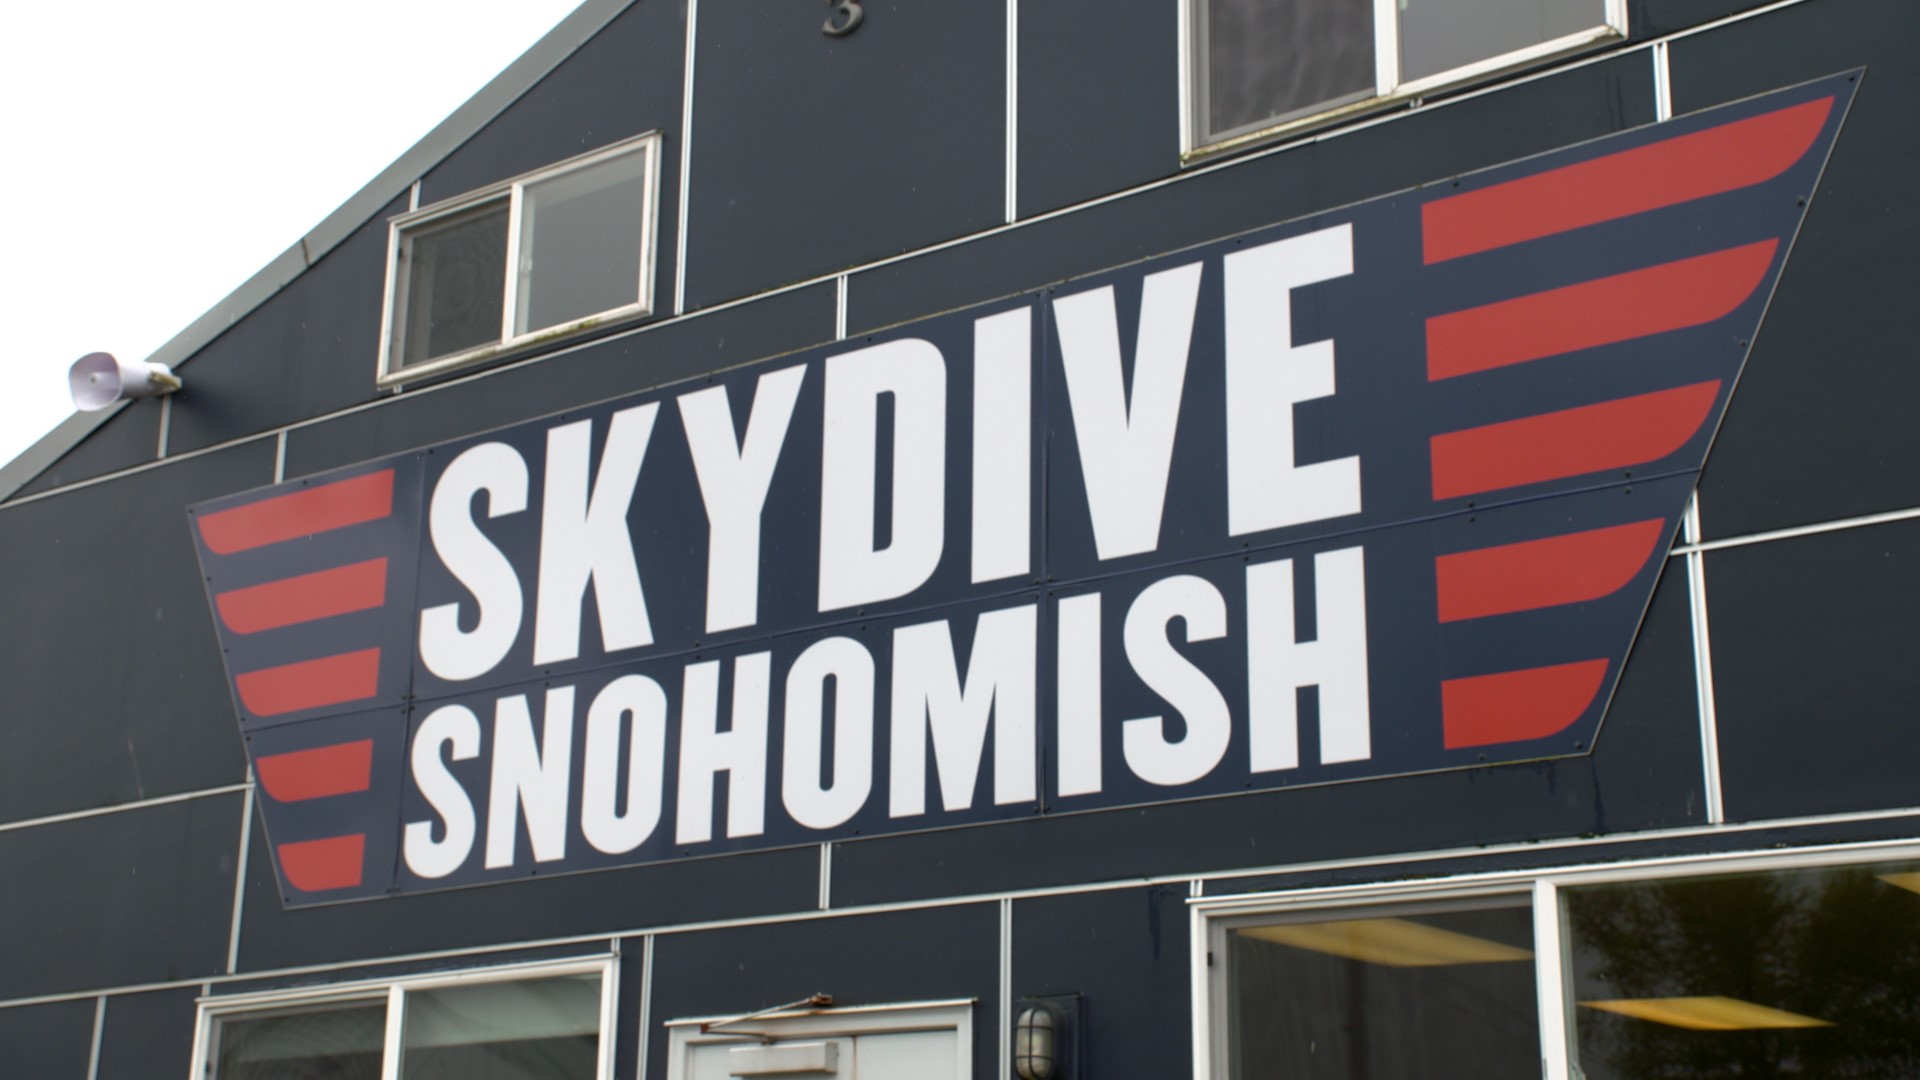 Experience the ultimate freedom of skydiving at Skydive Snohomish. #k5evening